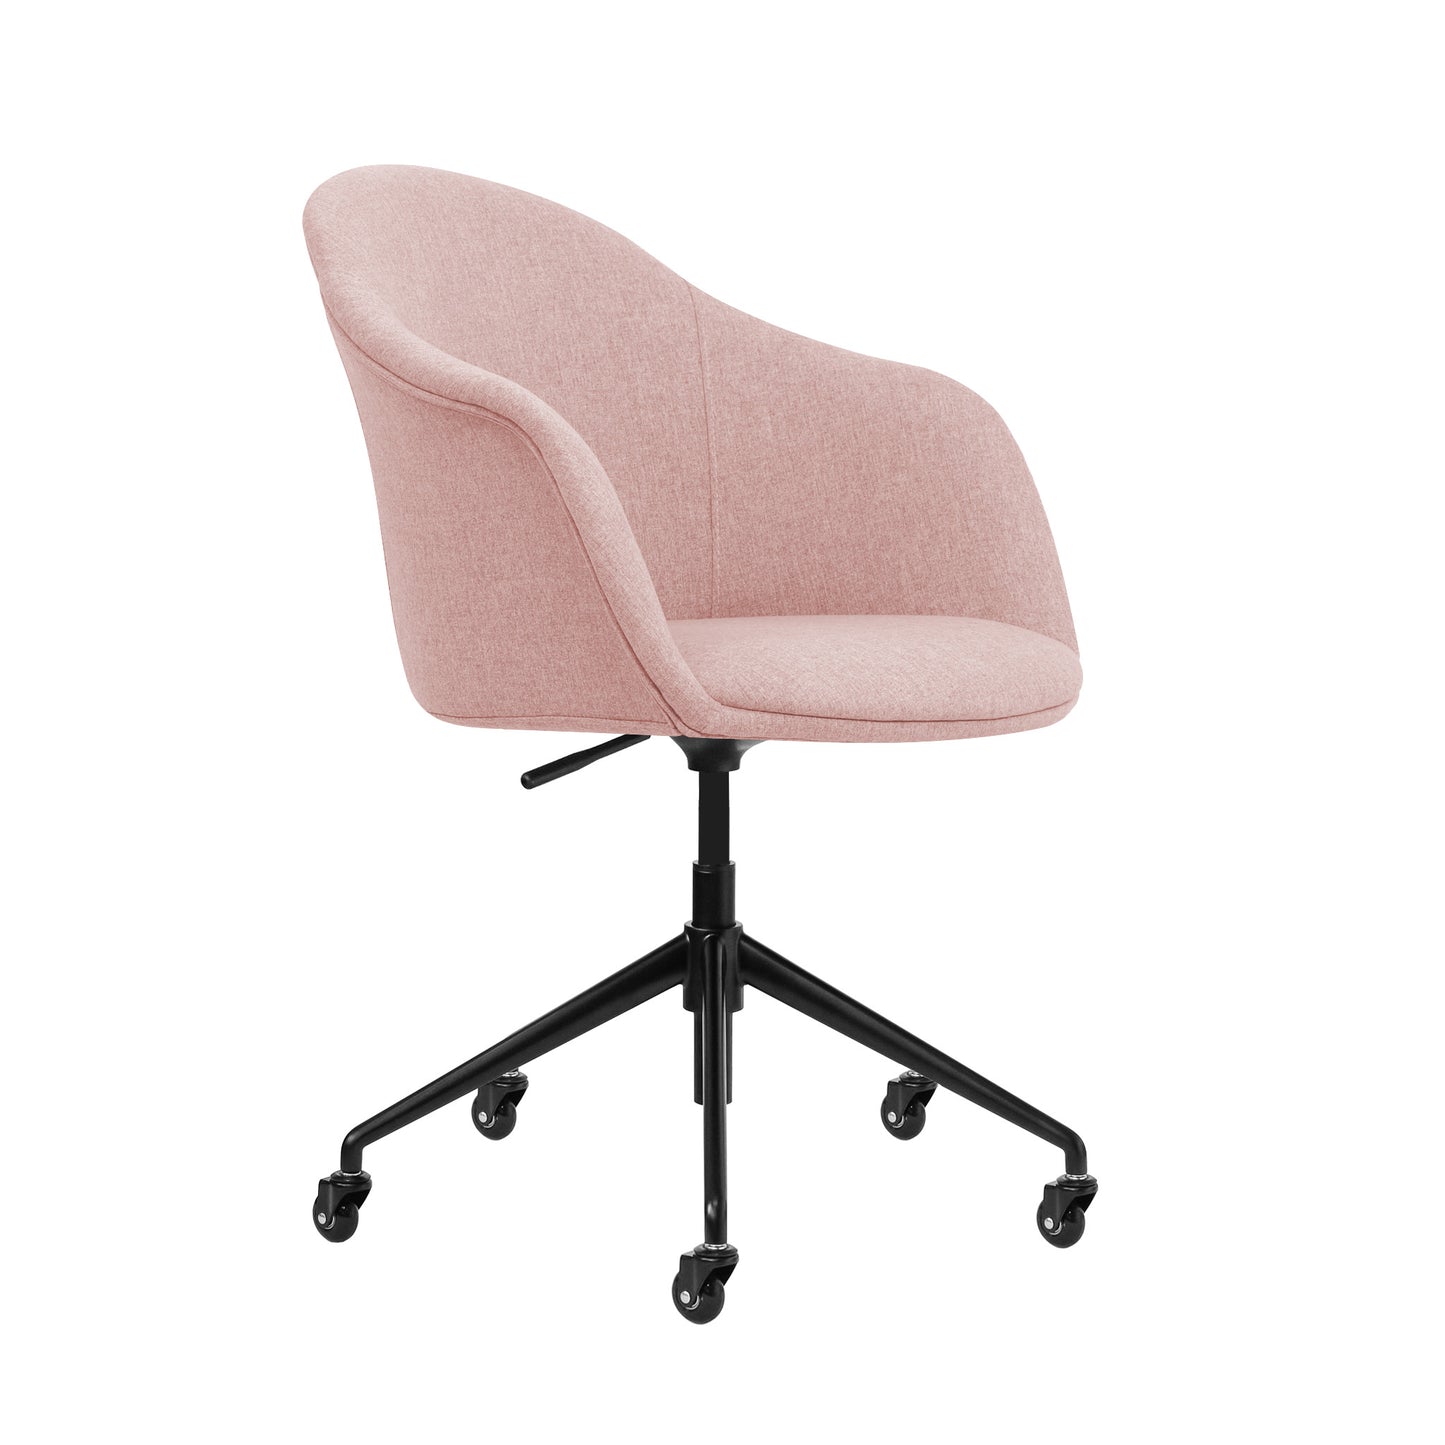 Astoria II Office Chair (Coral Pink)